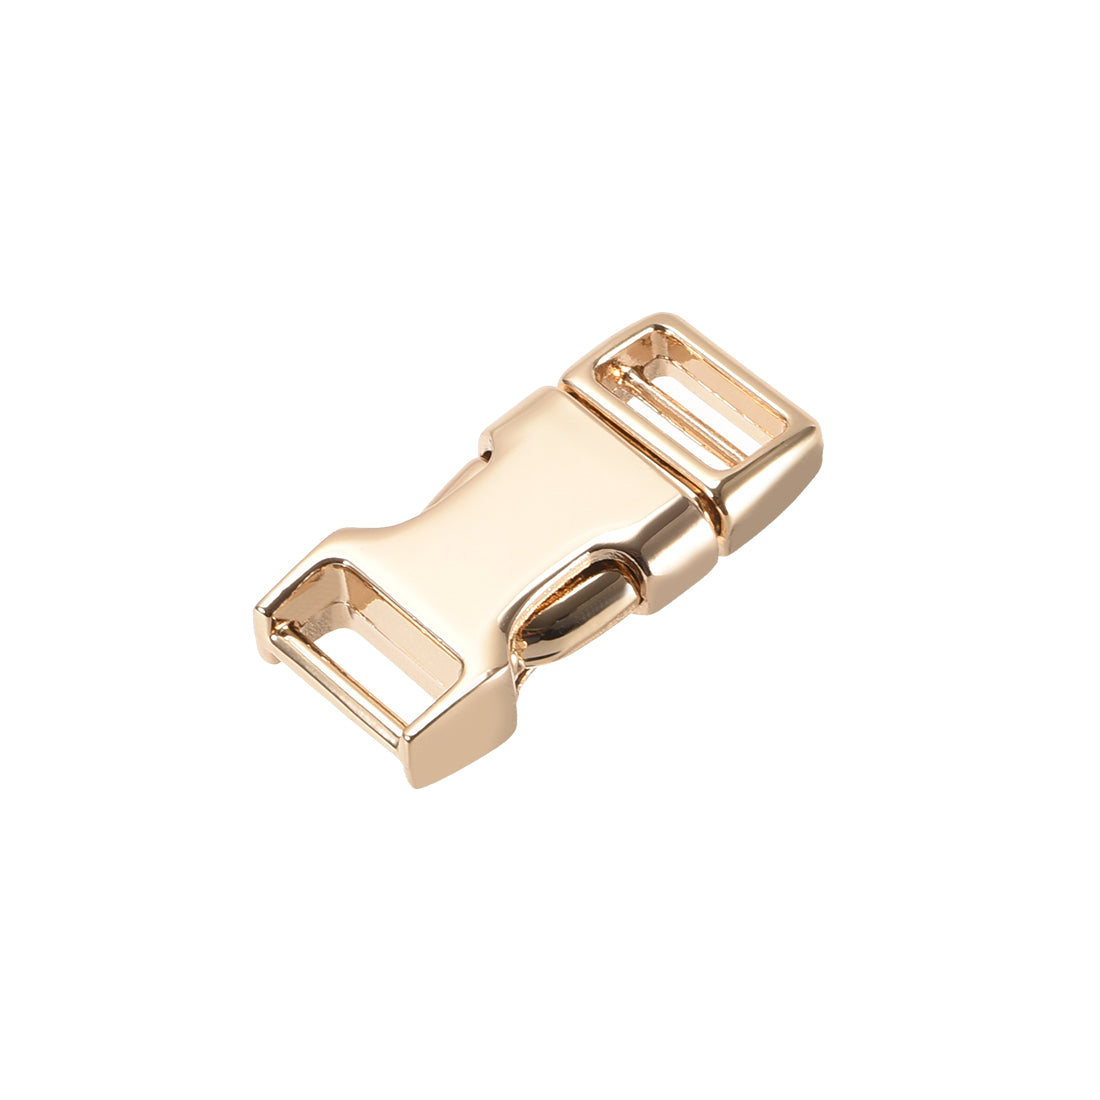 uxcell Uxcell Side Release Buckle, Zinc Alloy Adjustable Buckle